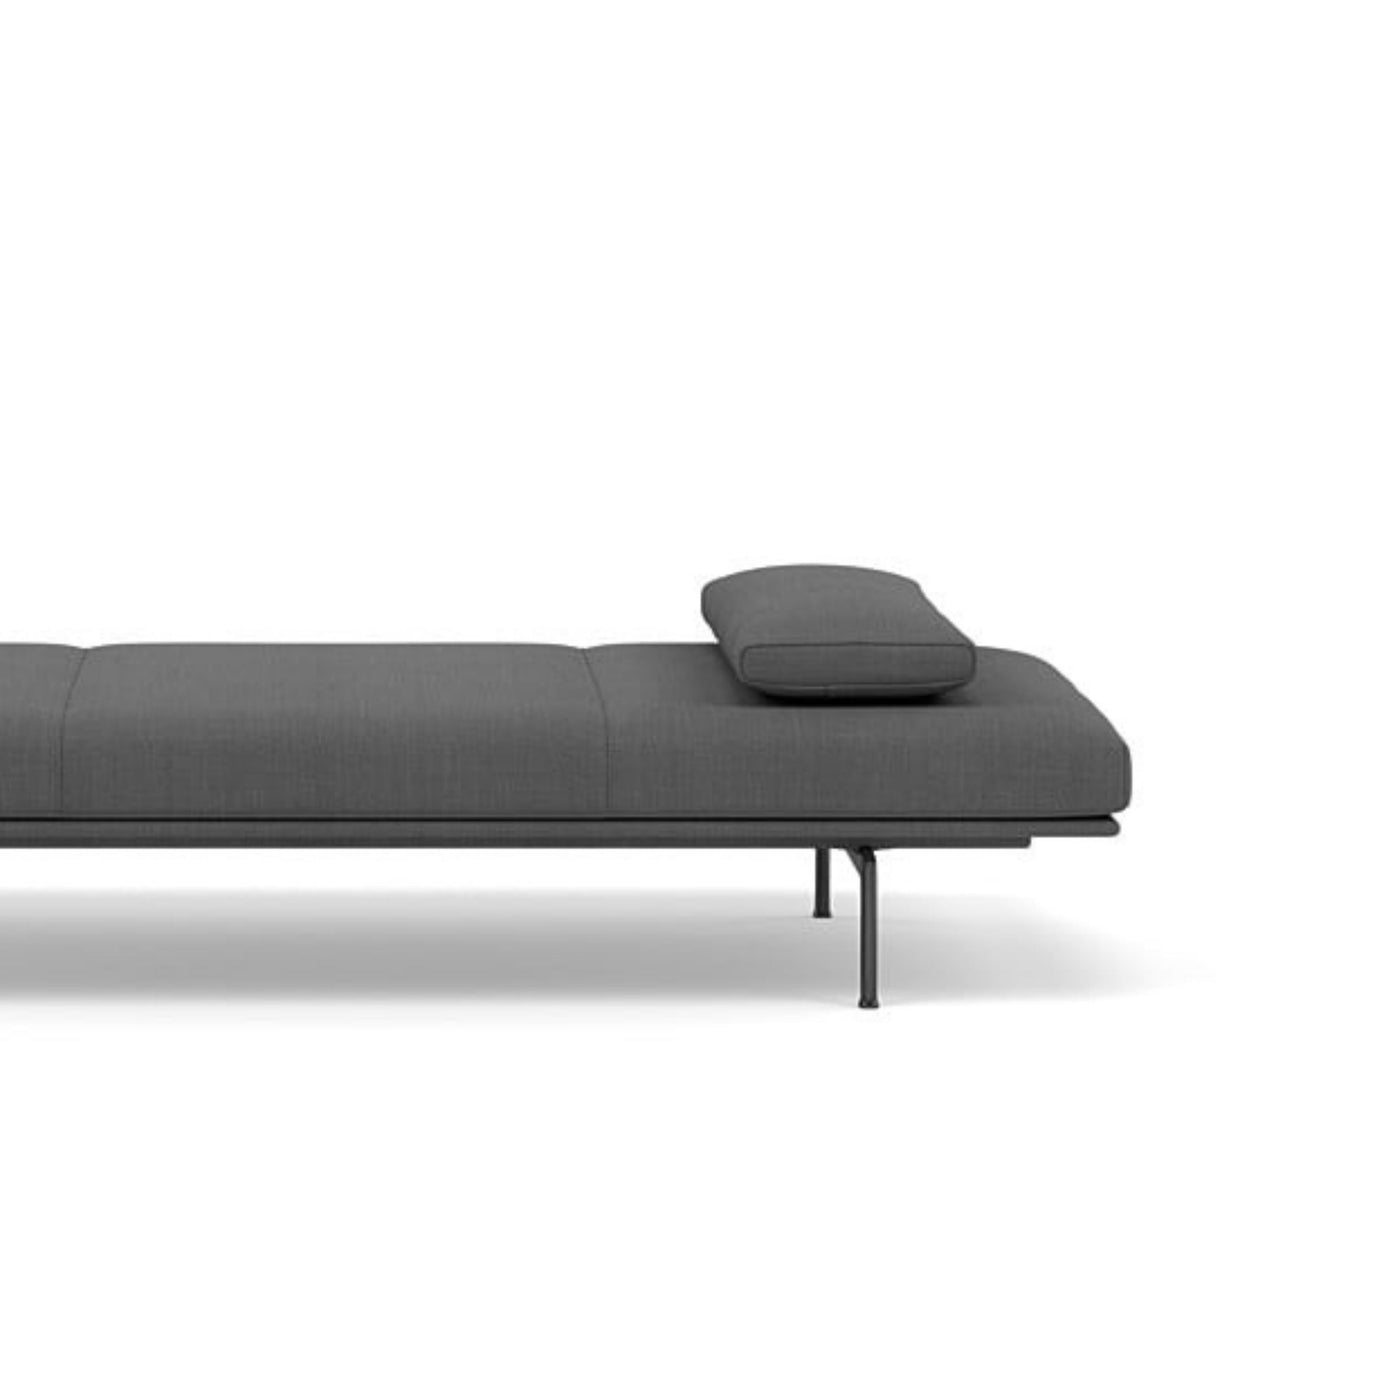 Muuto Outline Daybed Cushion, 70x30cm in remix 163. Shop online at someday designs. #colour_remix-163